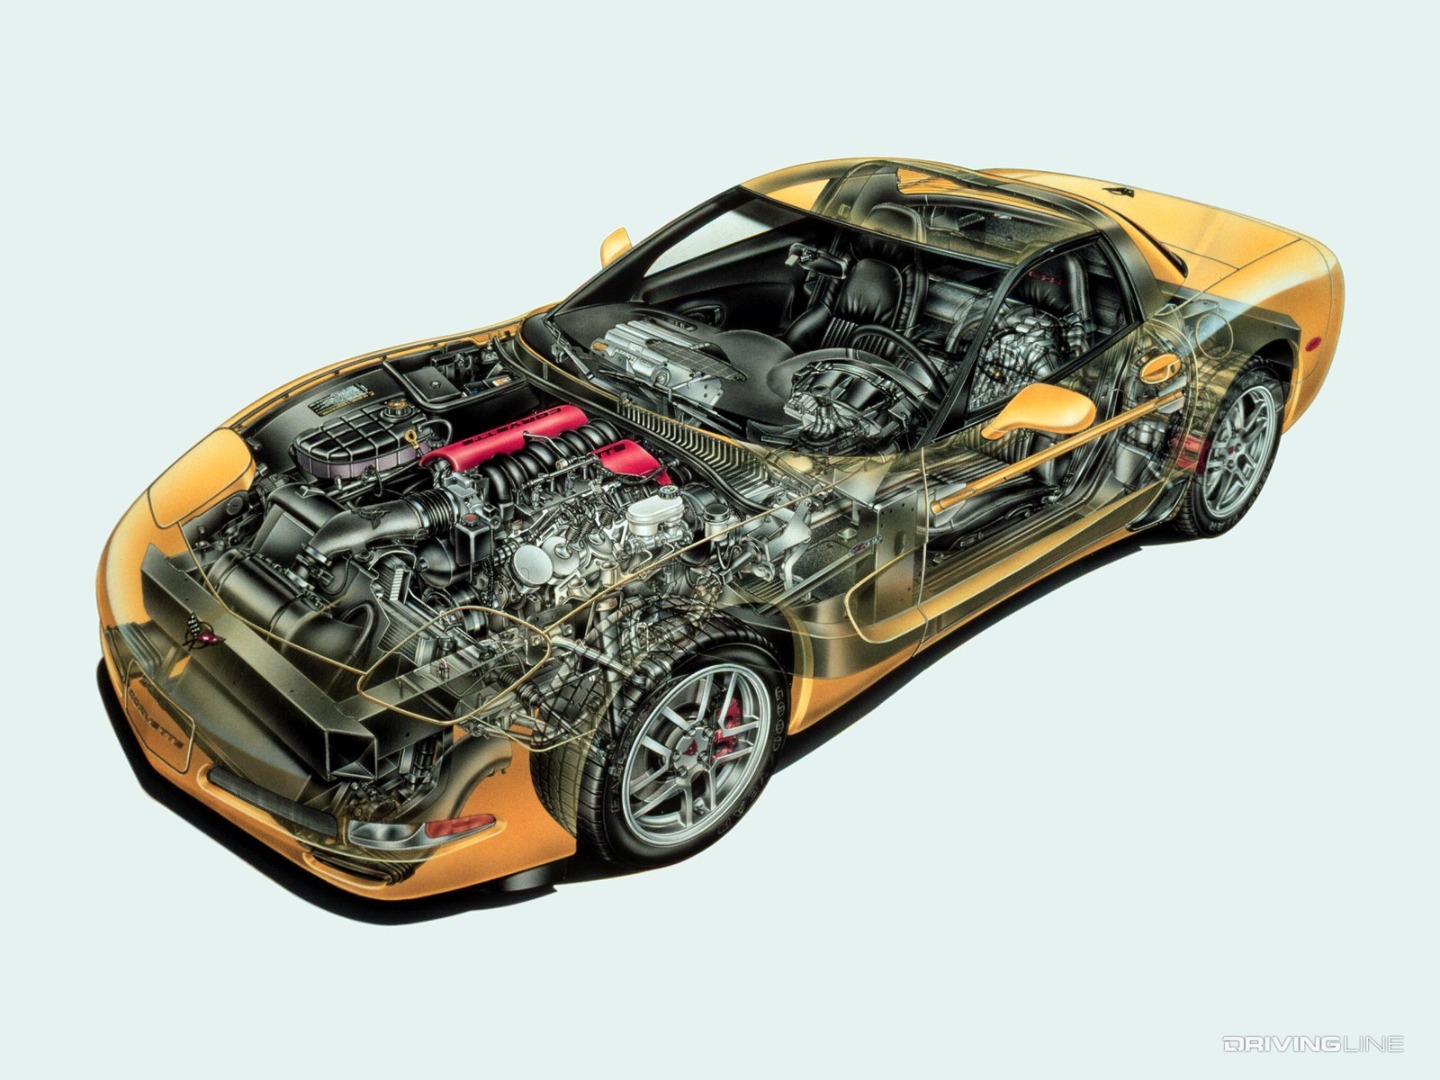 Secrets of the 1997-2004 C5 Chevrolet Corvette Chassis Revealed: Why It Wor...